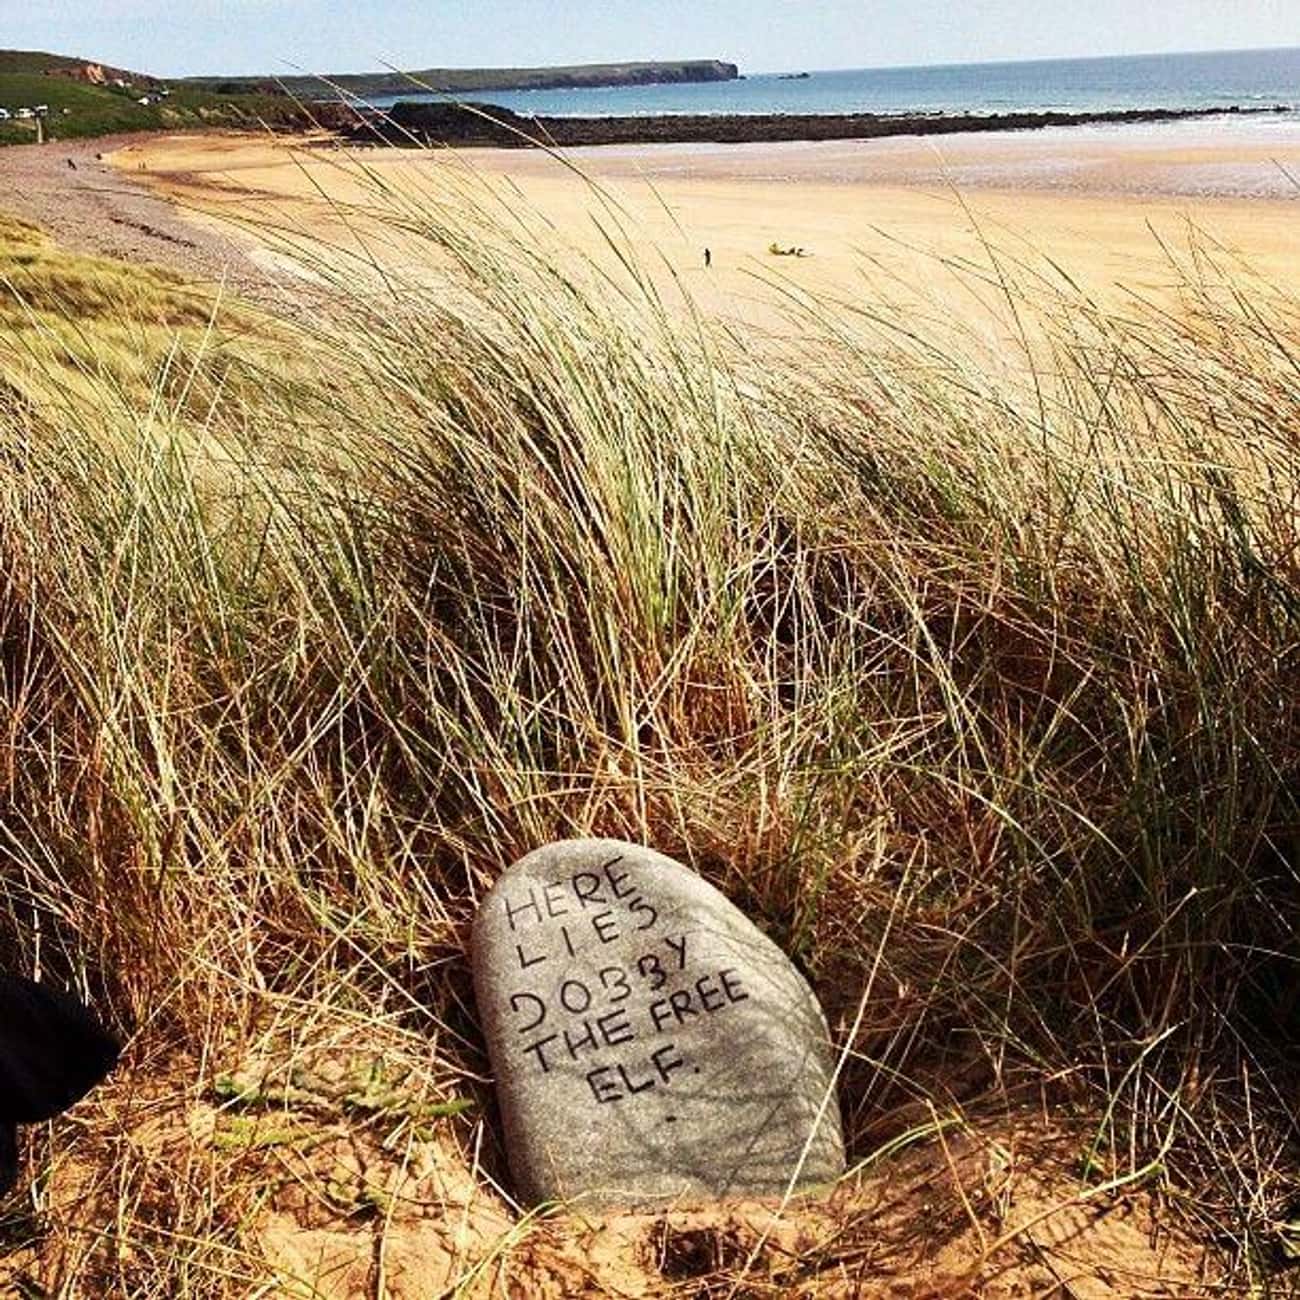 Dobby's Grave On A Beach In Wales Is A Potential Environmental Hazard